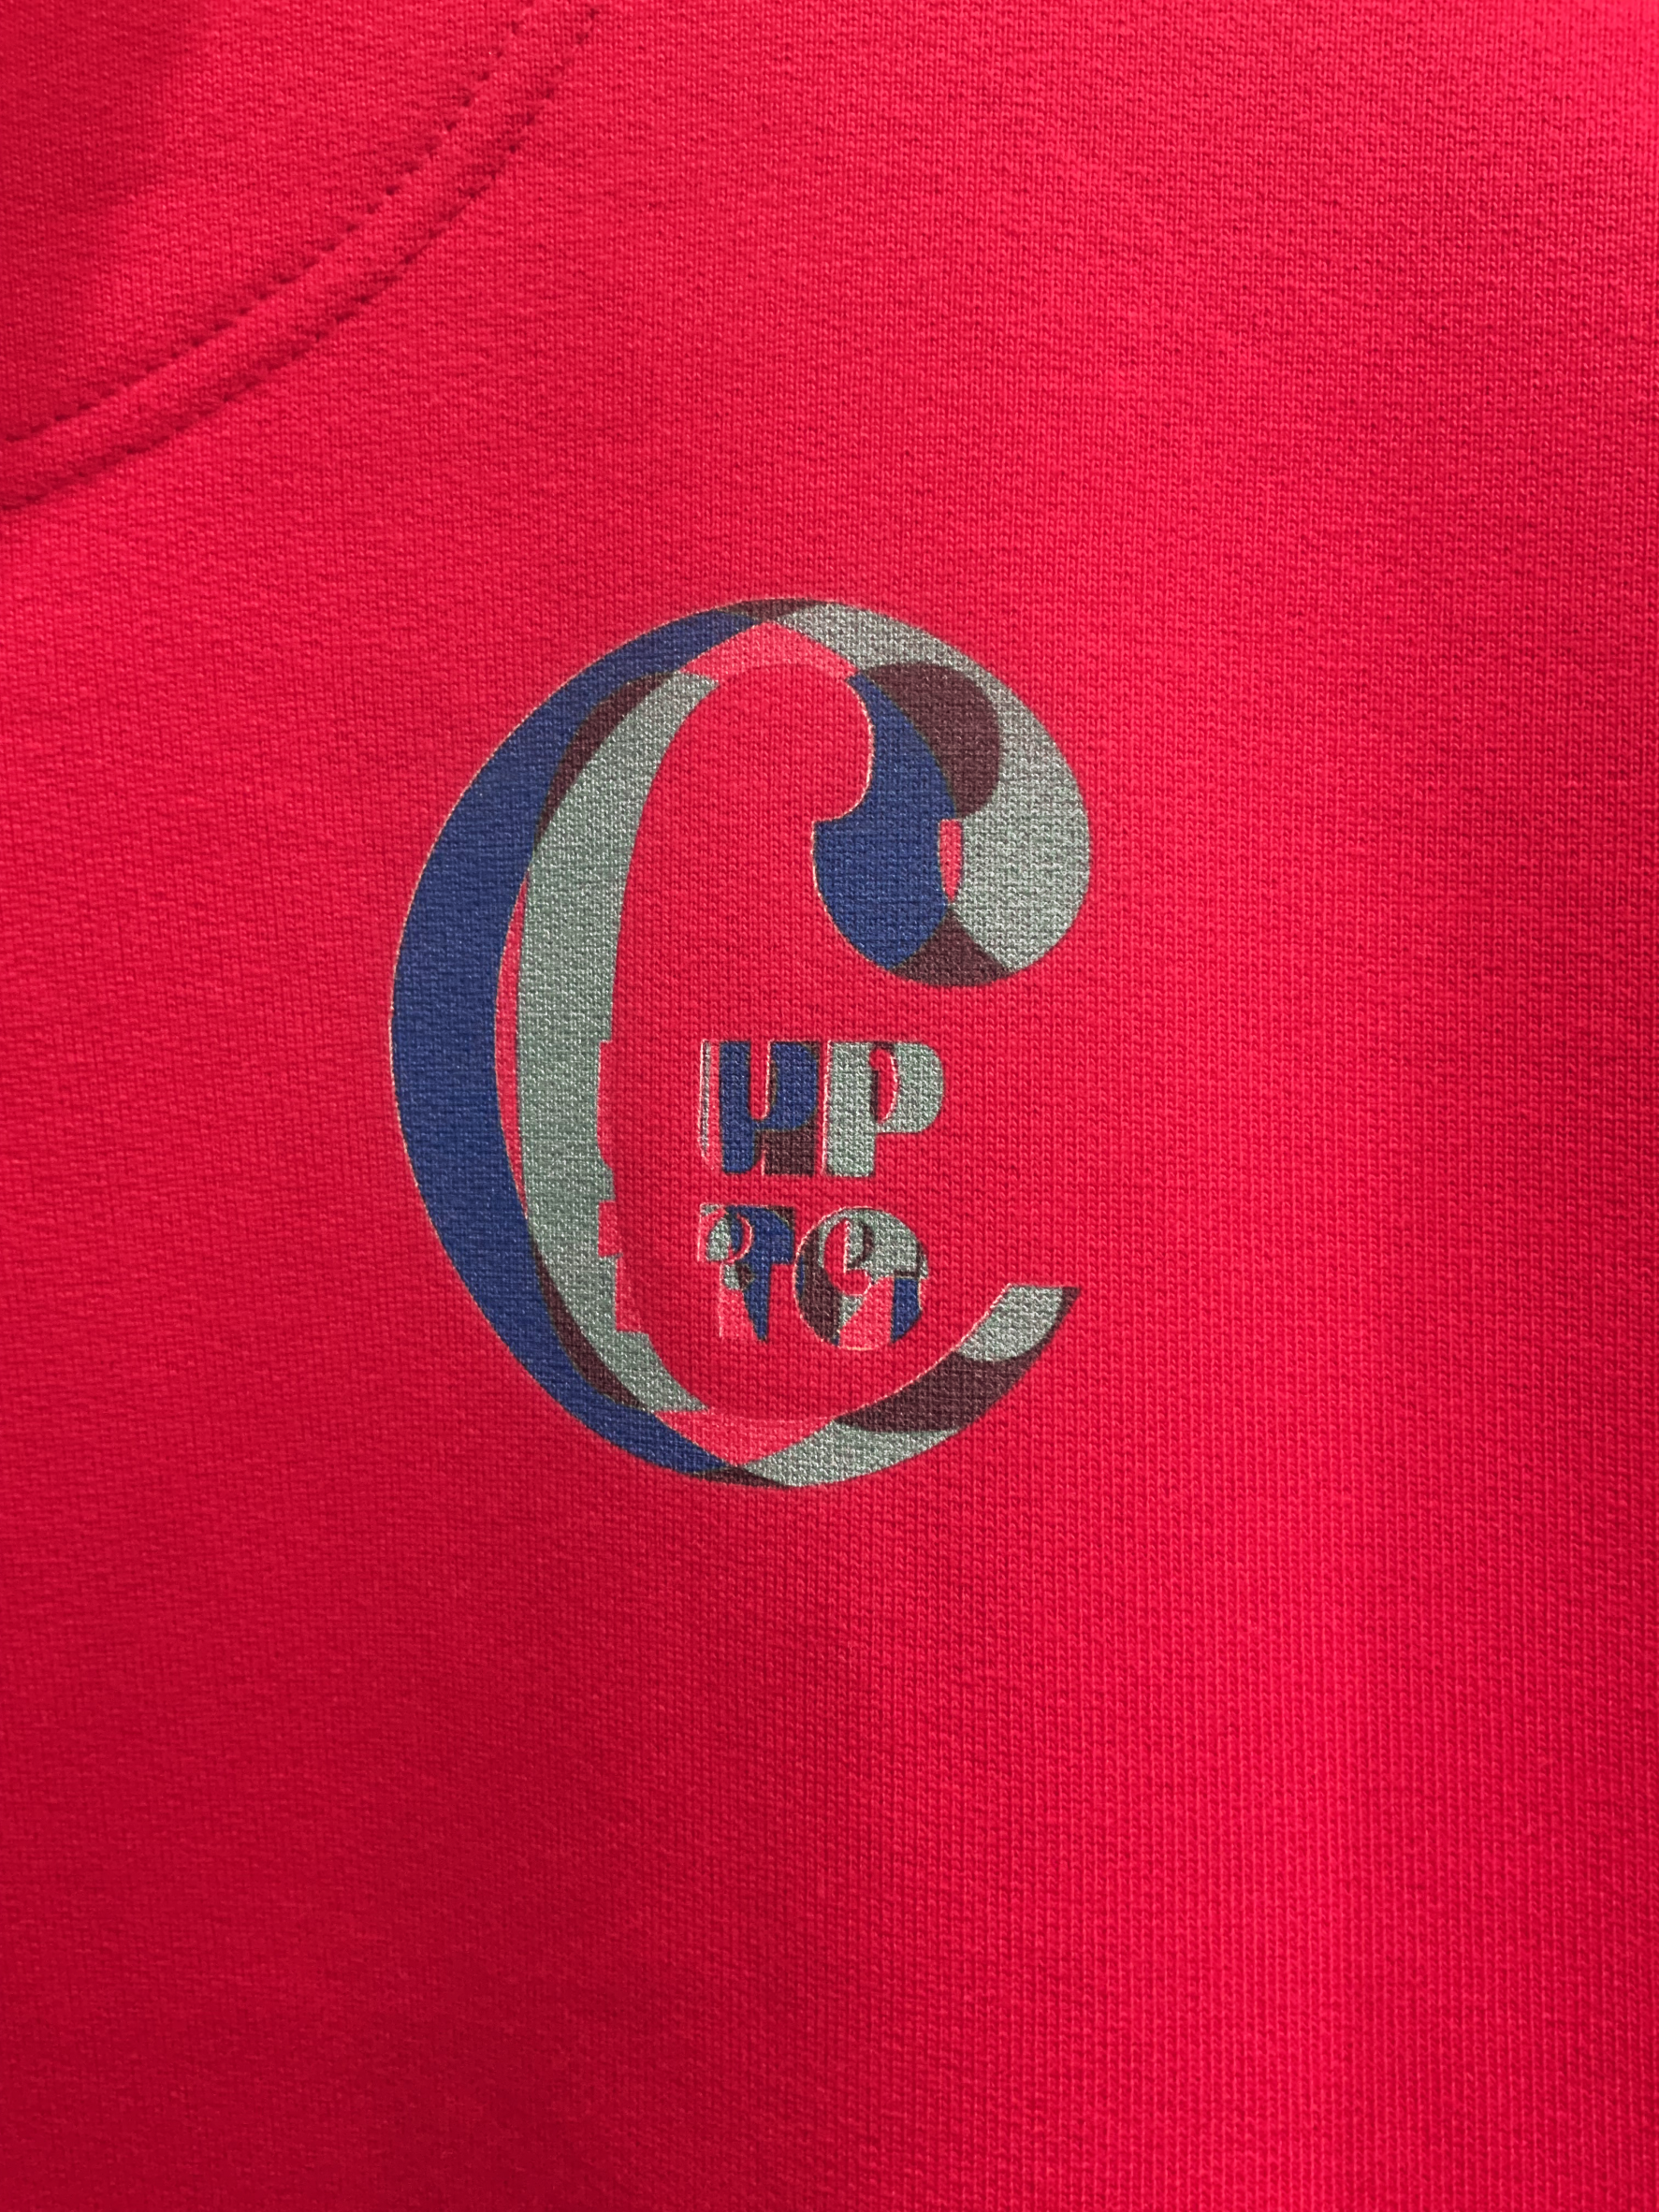 Hoodie The fire Up to C détail logo L